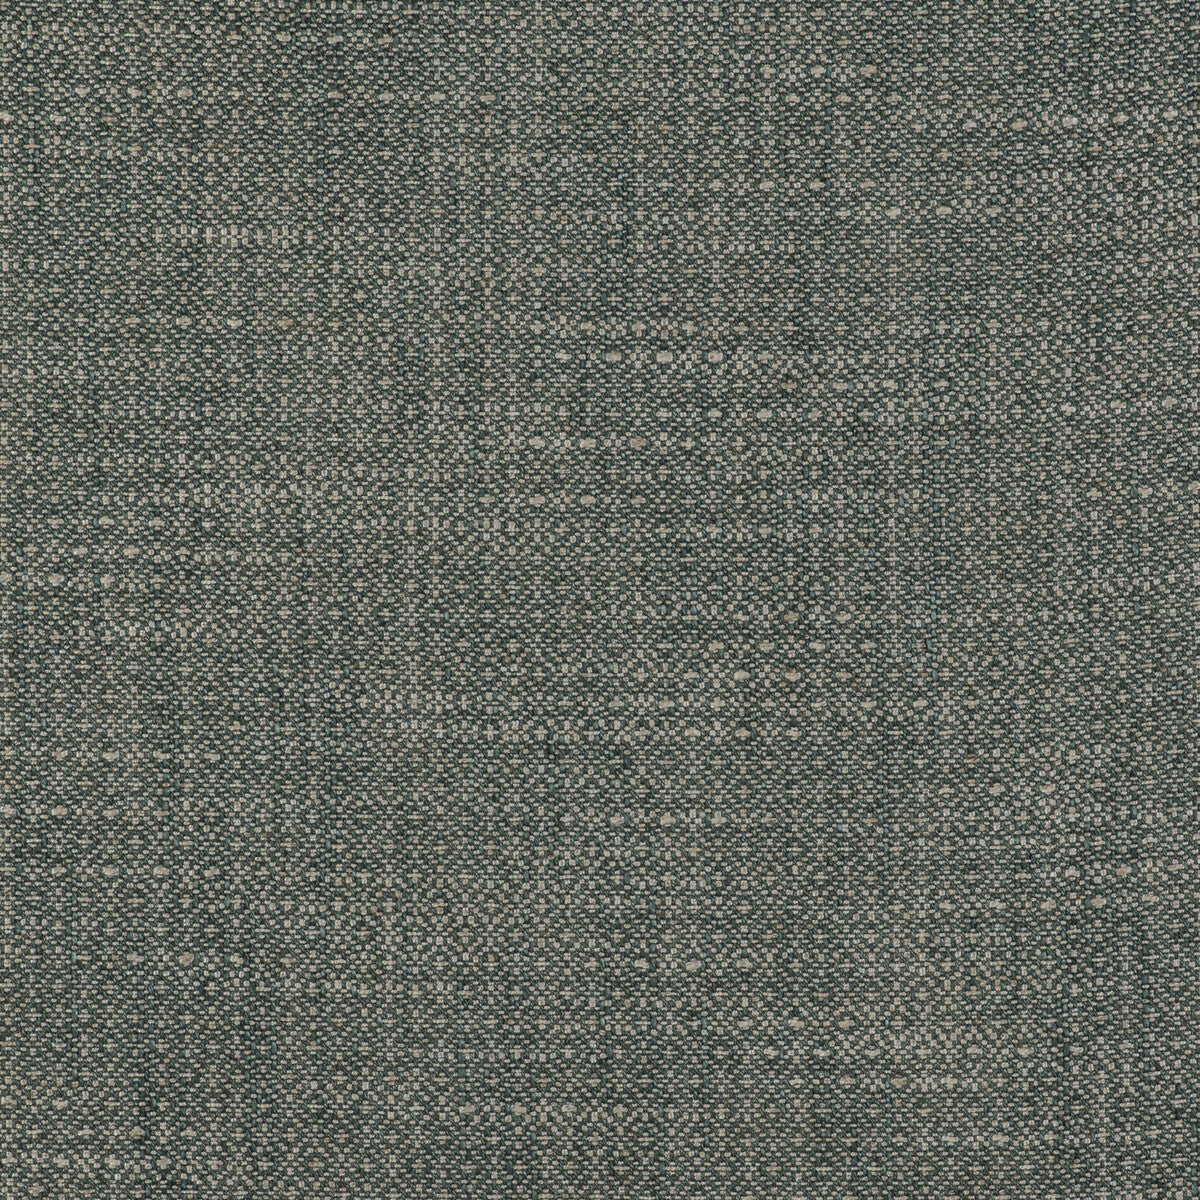 Kf Gyd fabric - pattern GDT5517.009.0 - by Gaston y Daniela in the Gaston Libreria collection